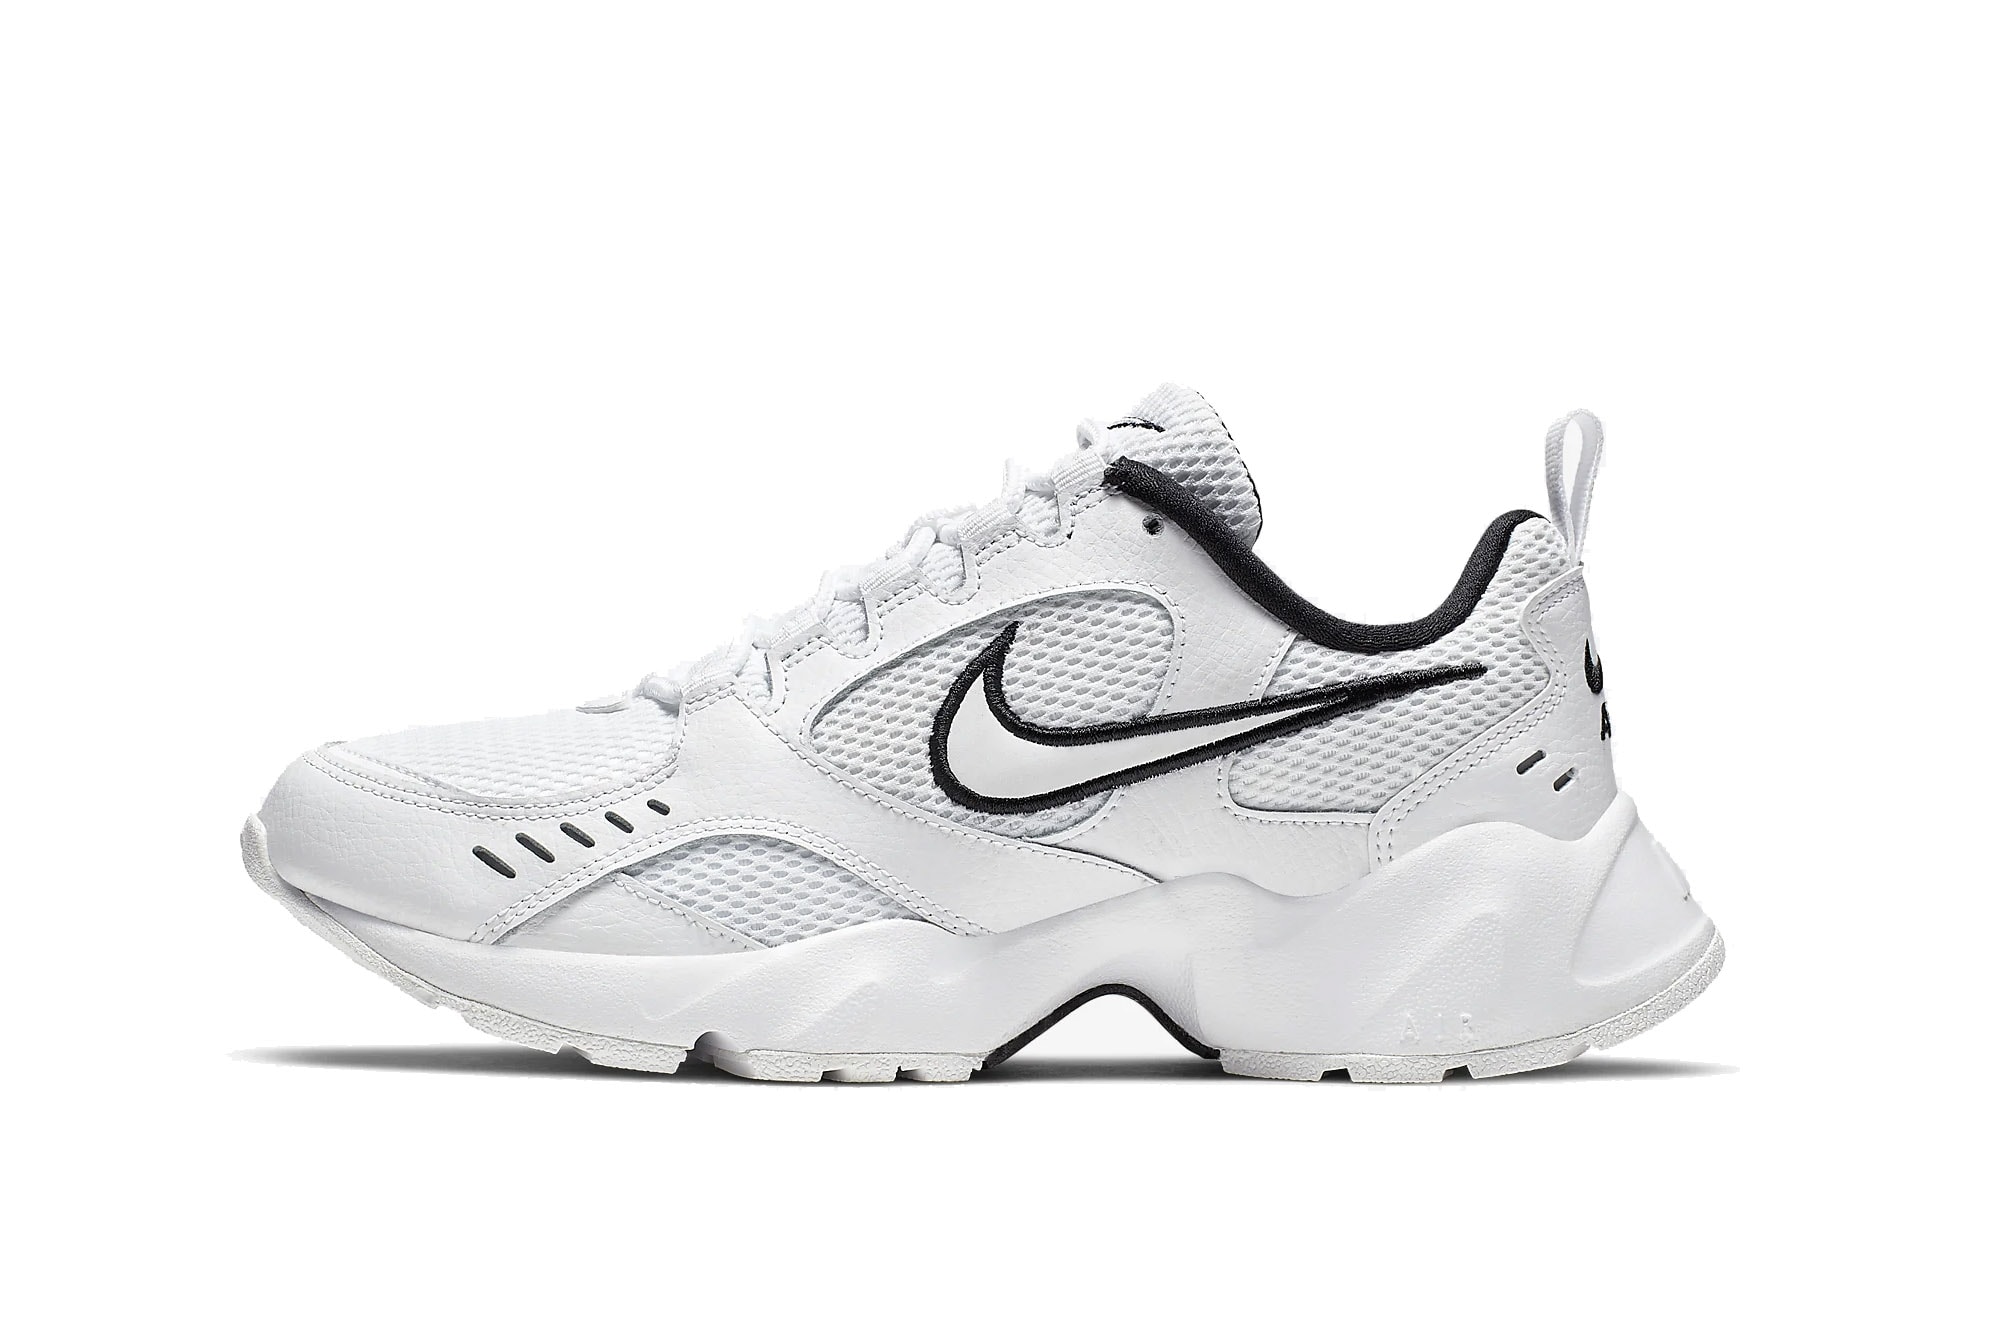 Nike Air Heights New Chunky Sneaker Trainer Dad Shoe Retro Inspired White Black Purple Silver Color 